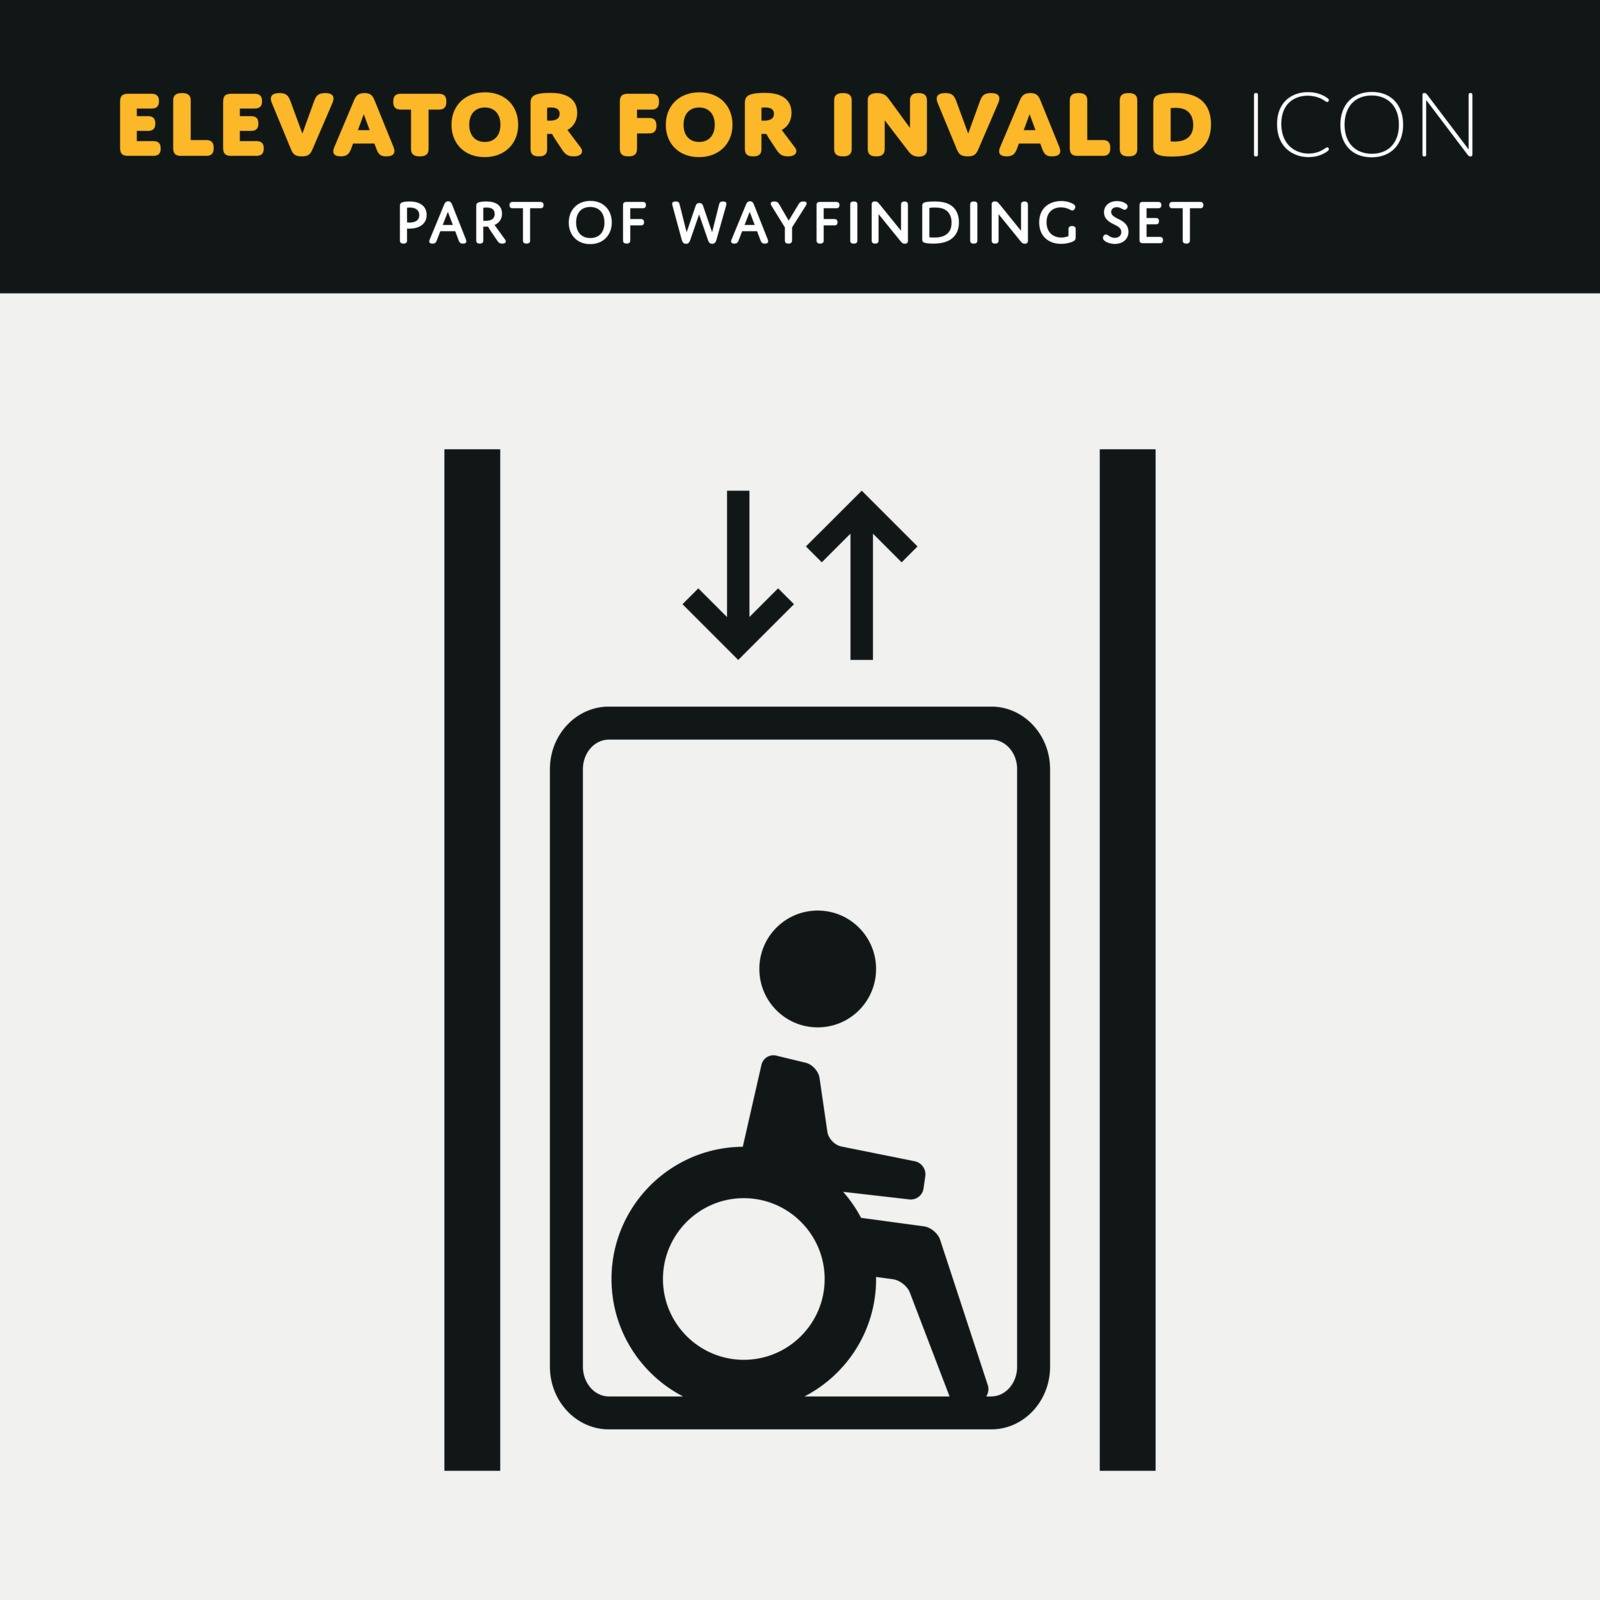 Disability man pictogram flat icon lift by GraphicDealer